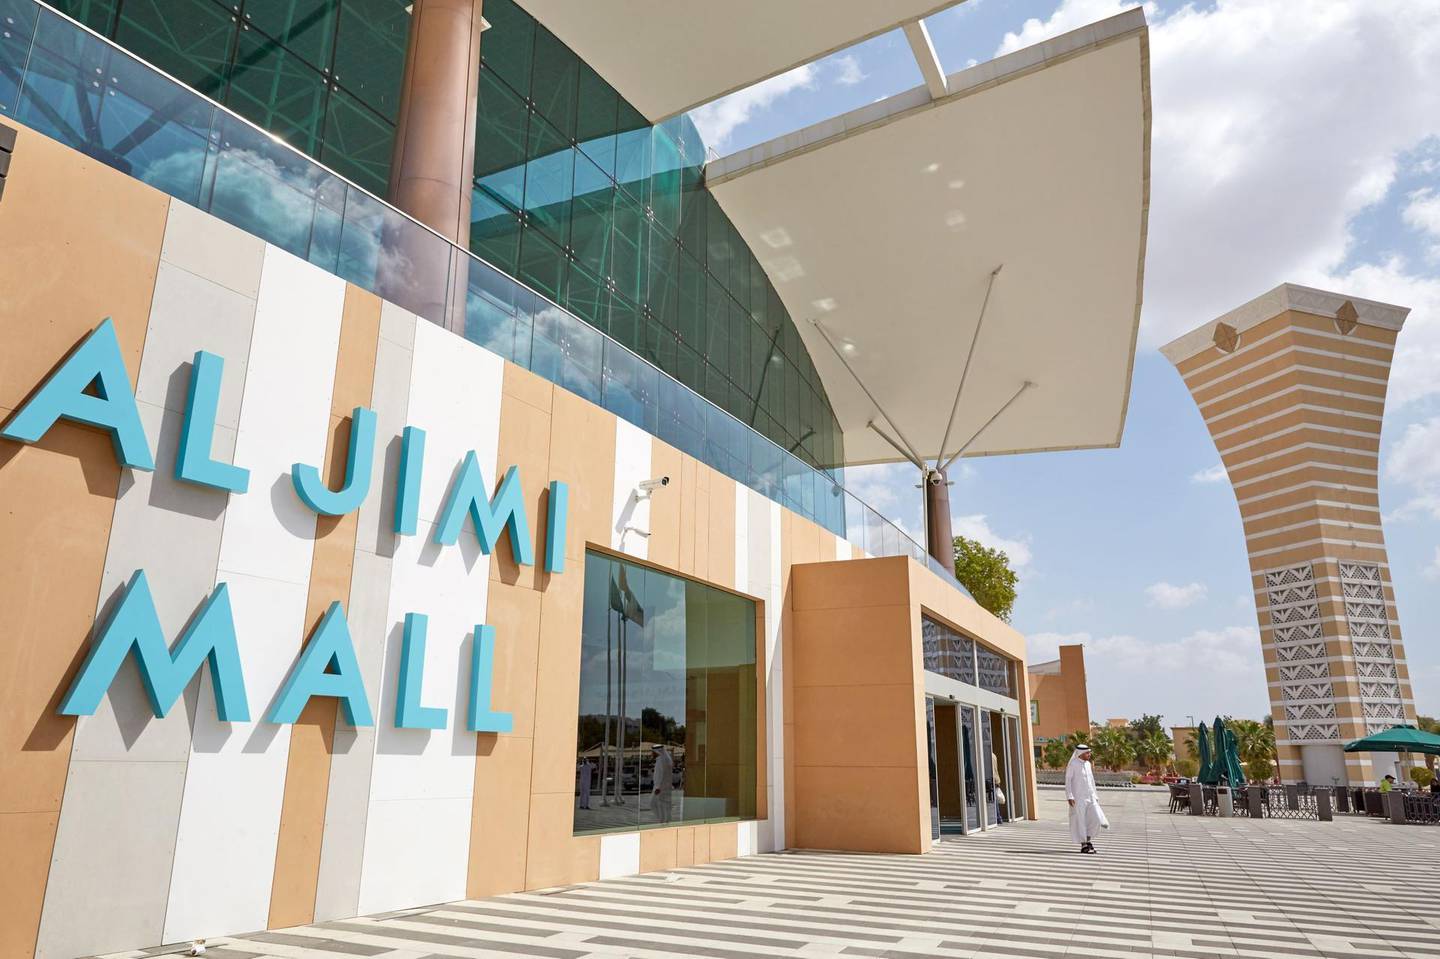 Earn Etihad tier miles when shopping at Al Jimi Mall in Al Ain, as well as at Yas Mall and World Trade Centre Mall in Abu Dhabi. Courtesy Etihad 